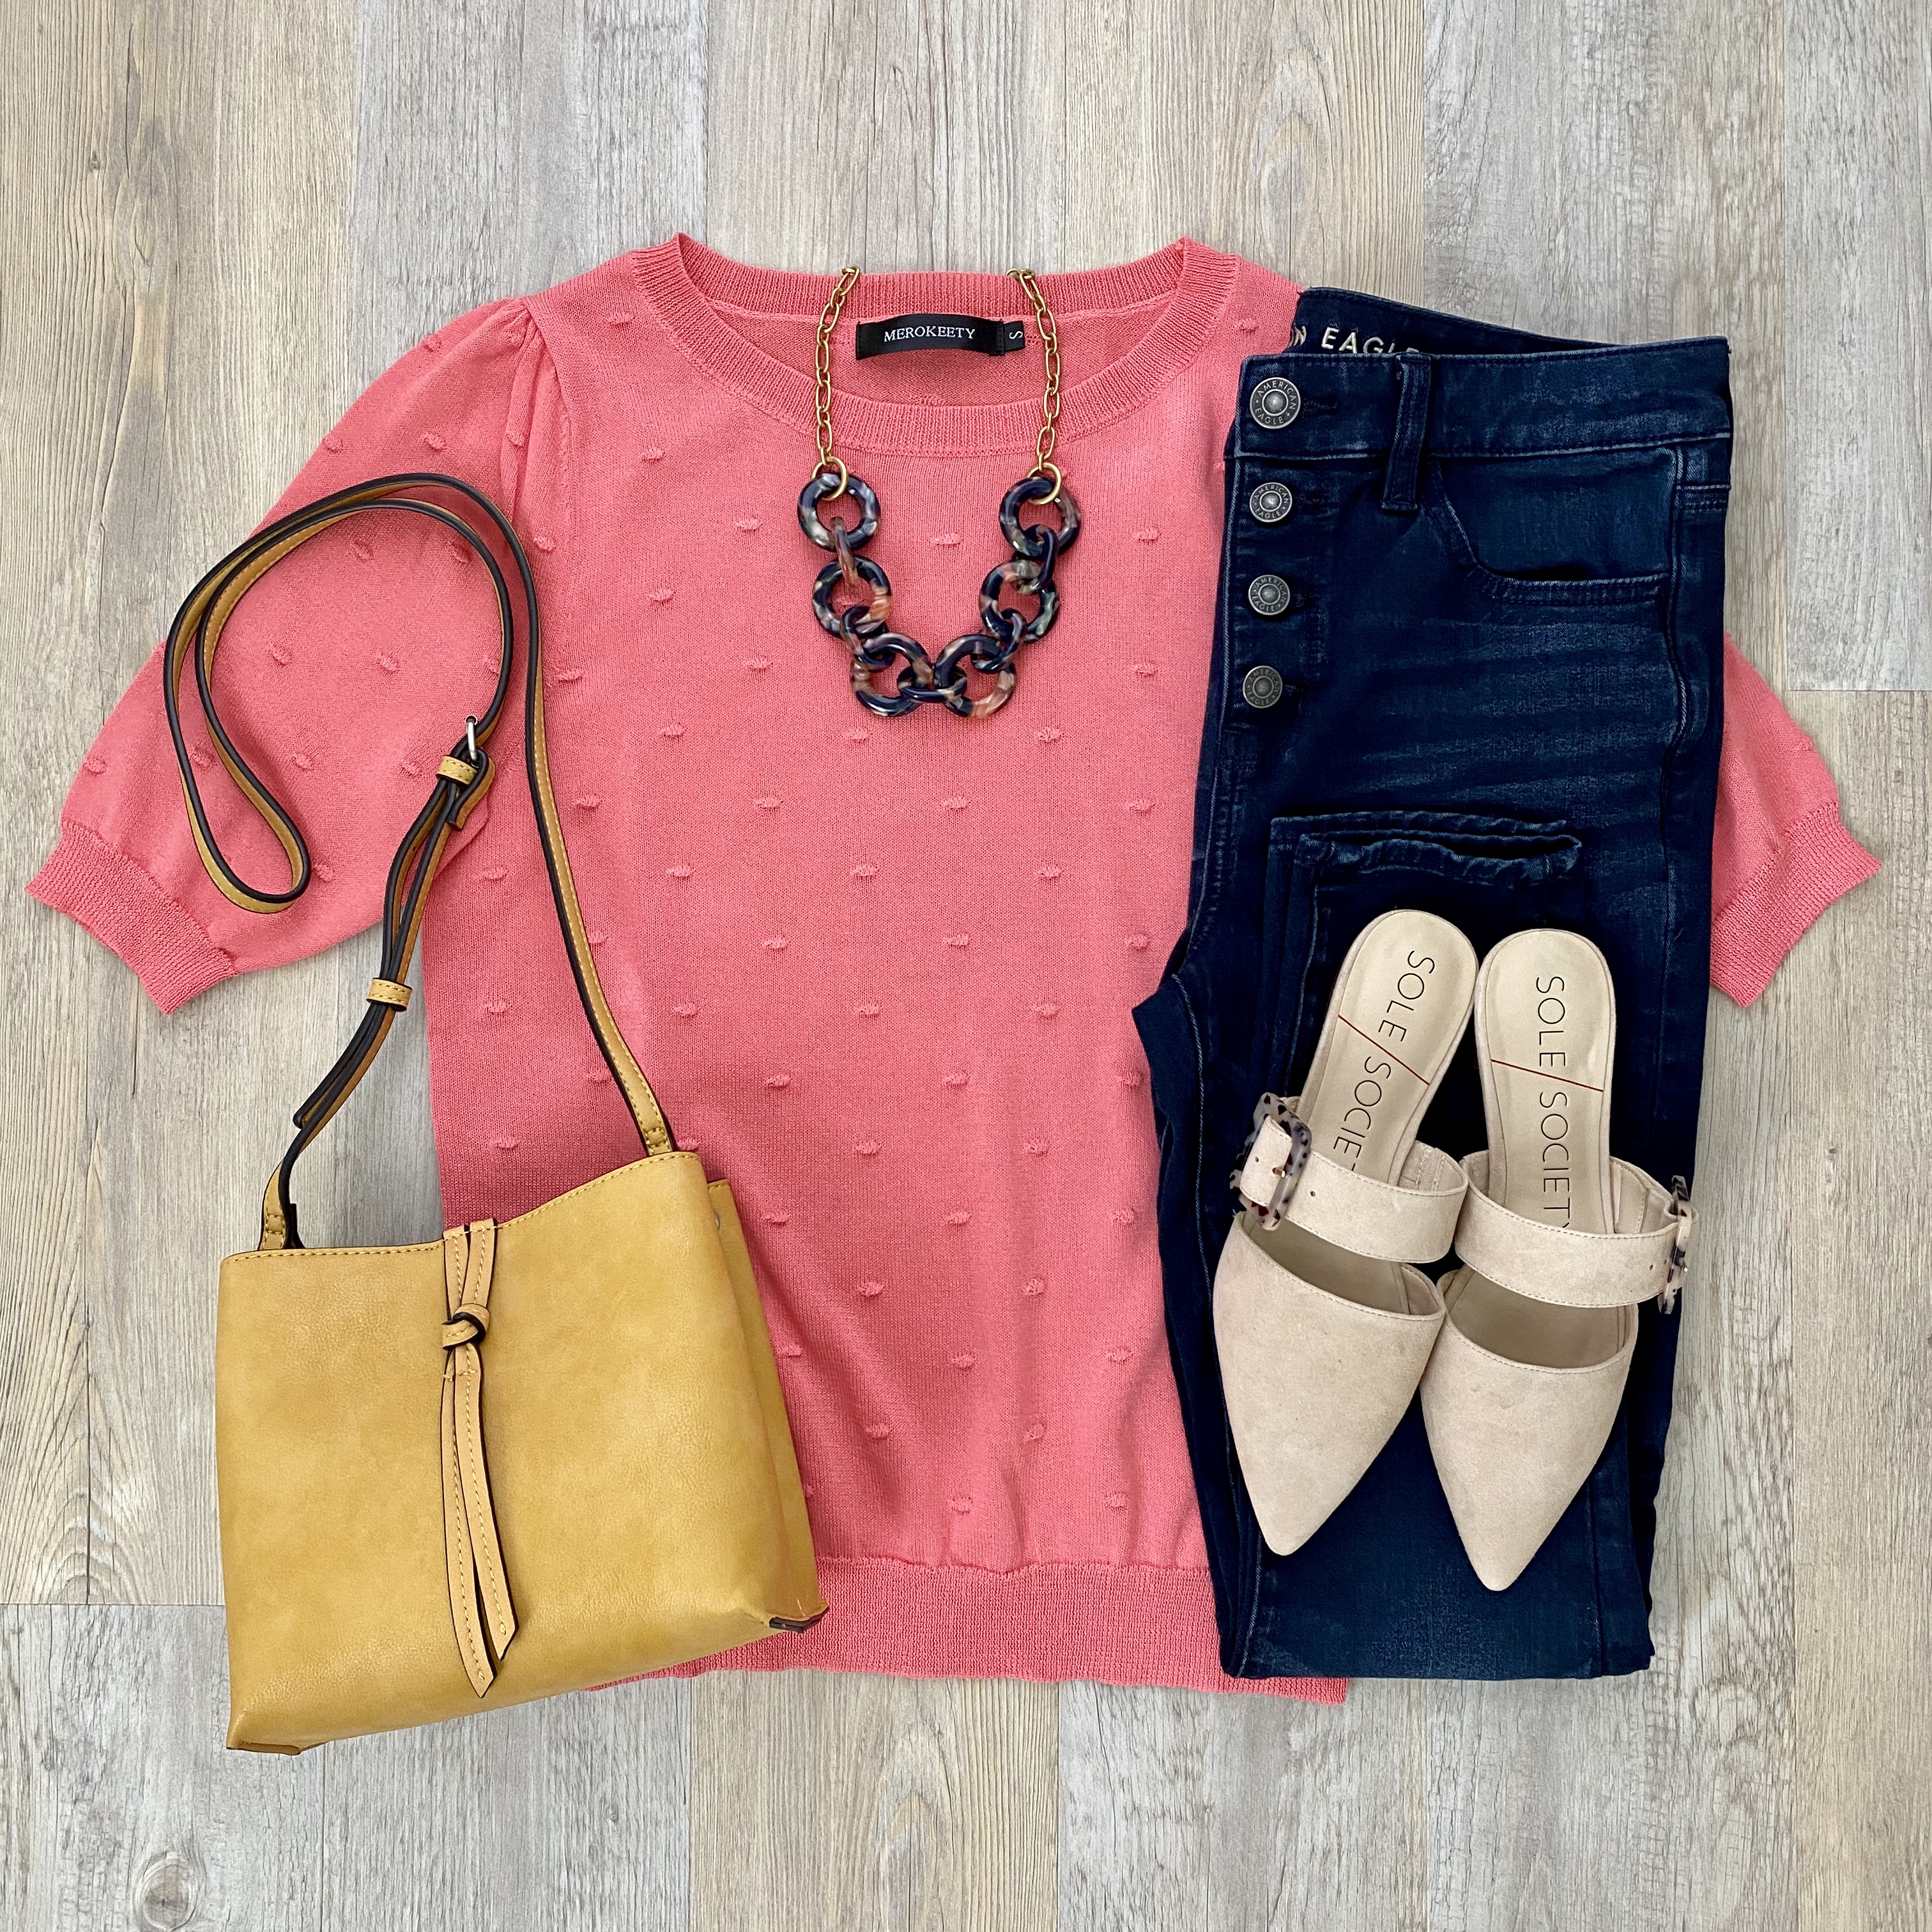 Amazon sweater, AE jeans, Sole Society mules, Sole Society bag, J. Crew Factory tortoise necklace